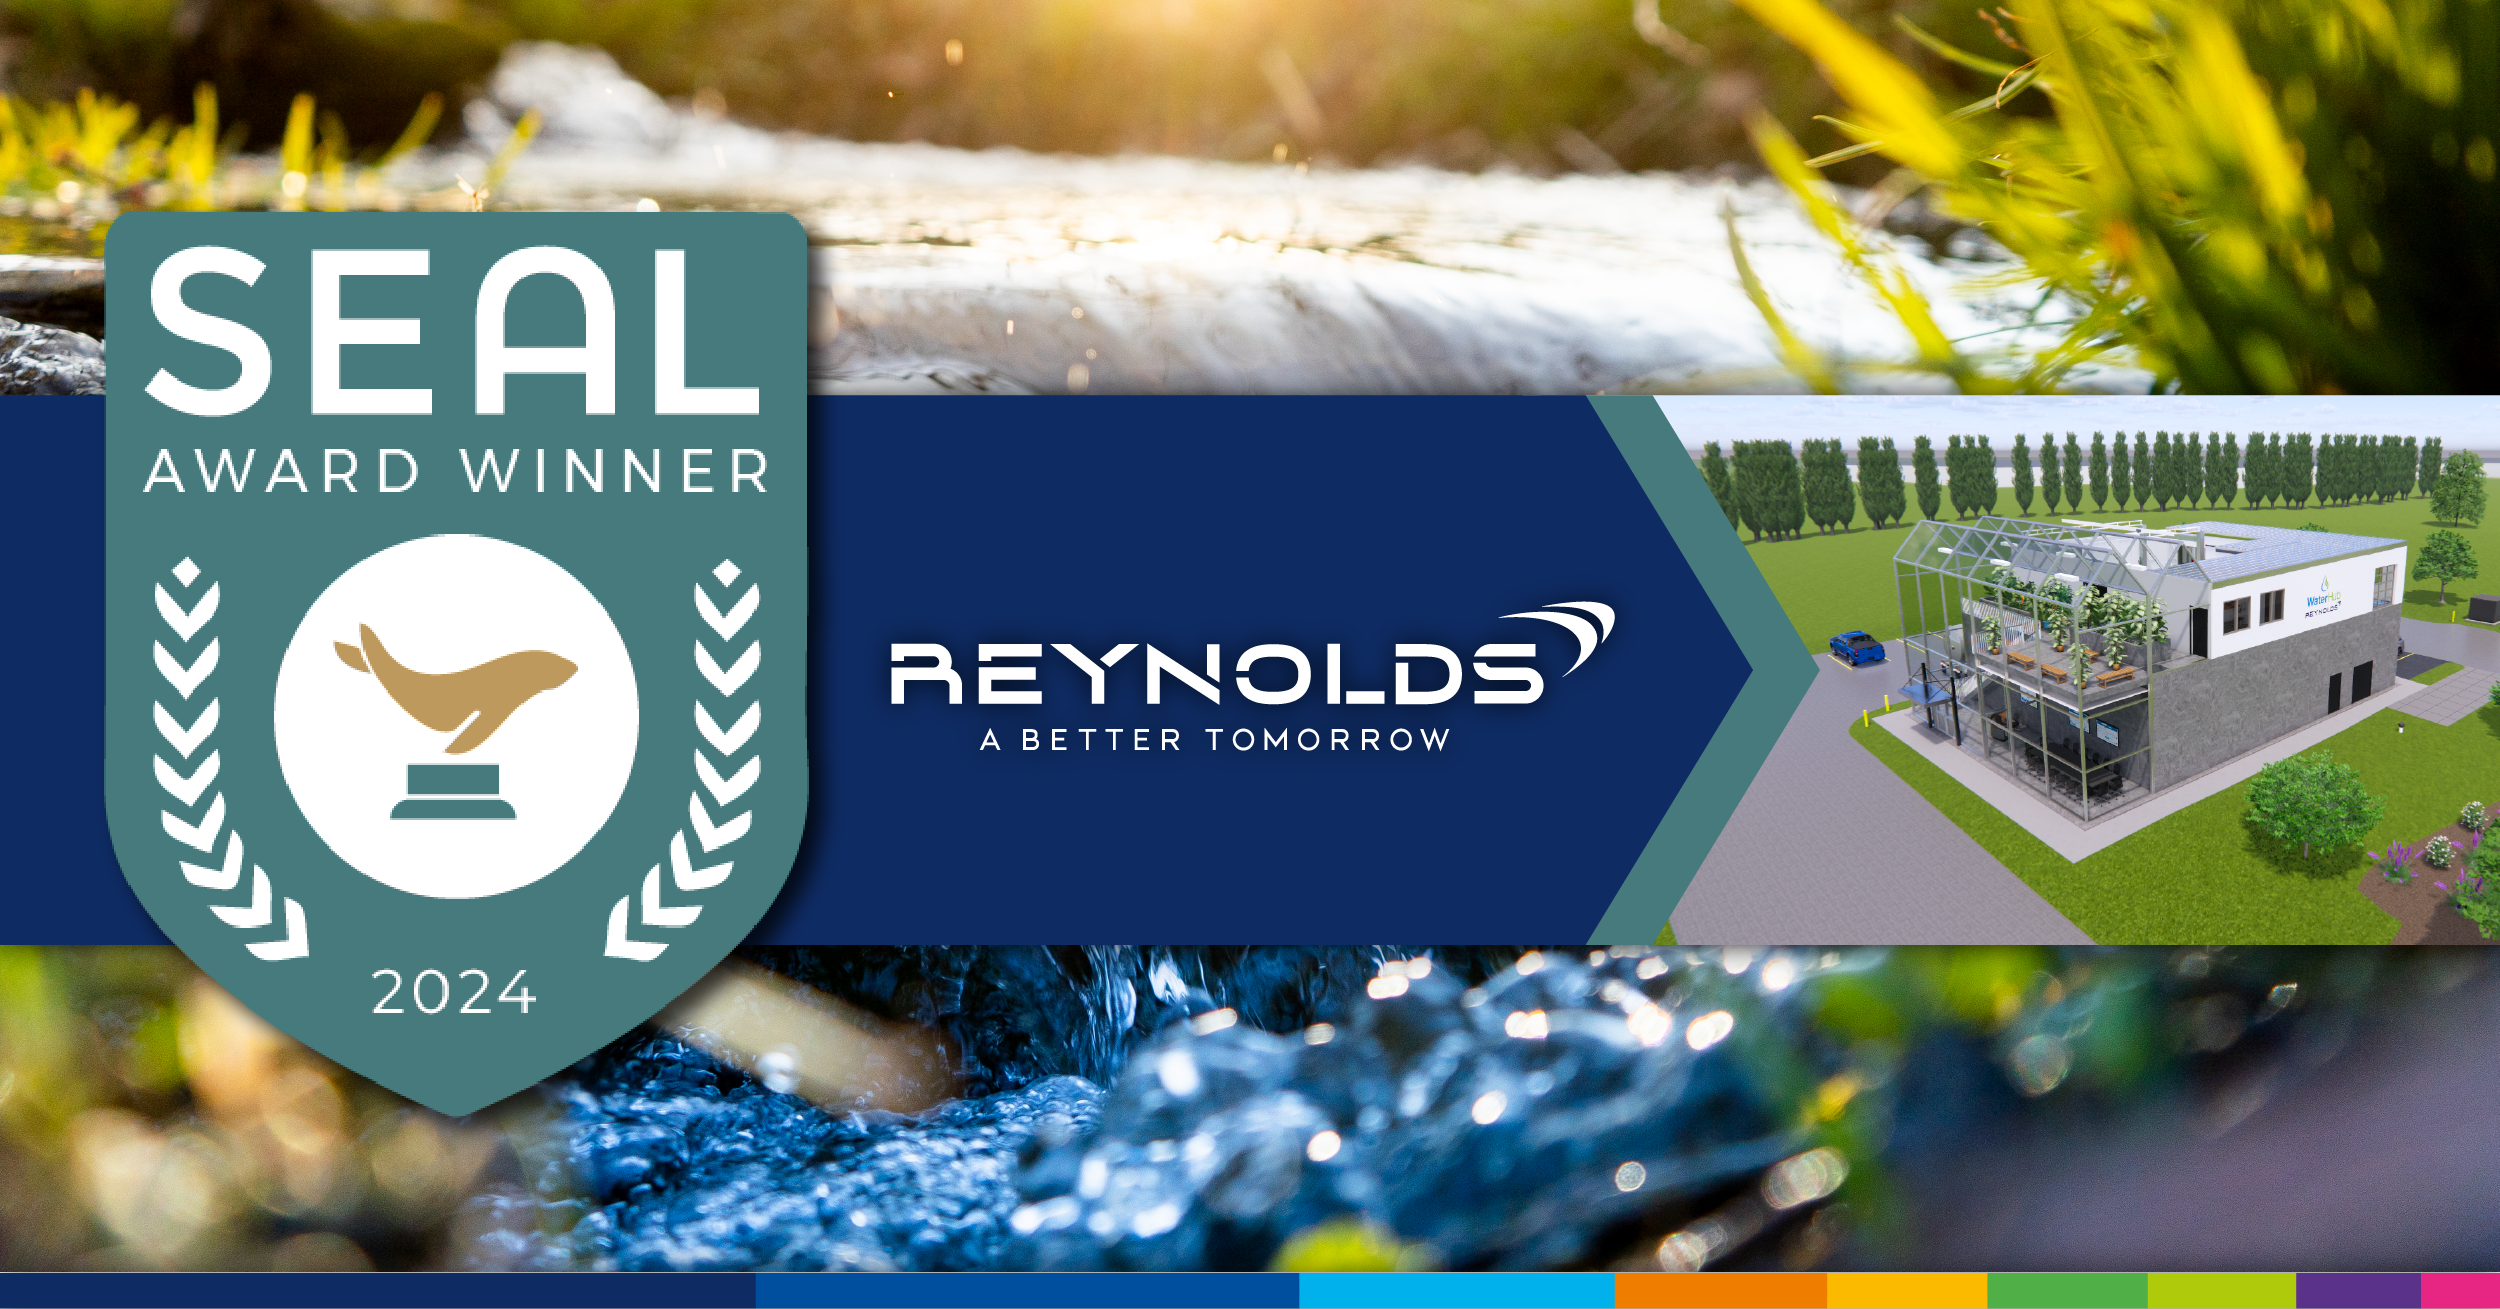 2024 SEAL Business Awards for Reynolds American.